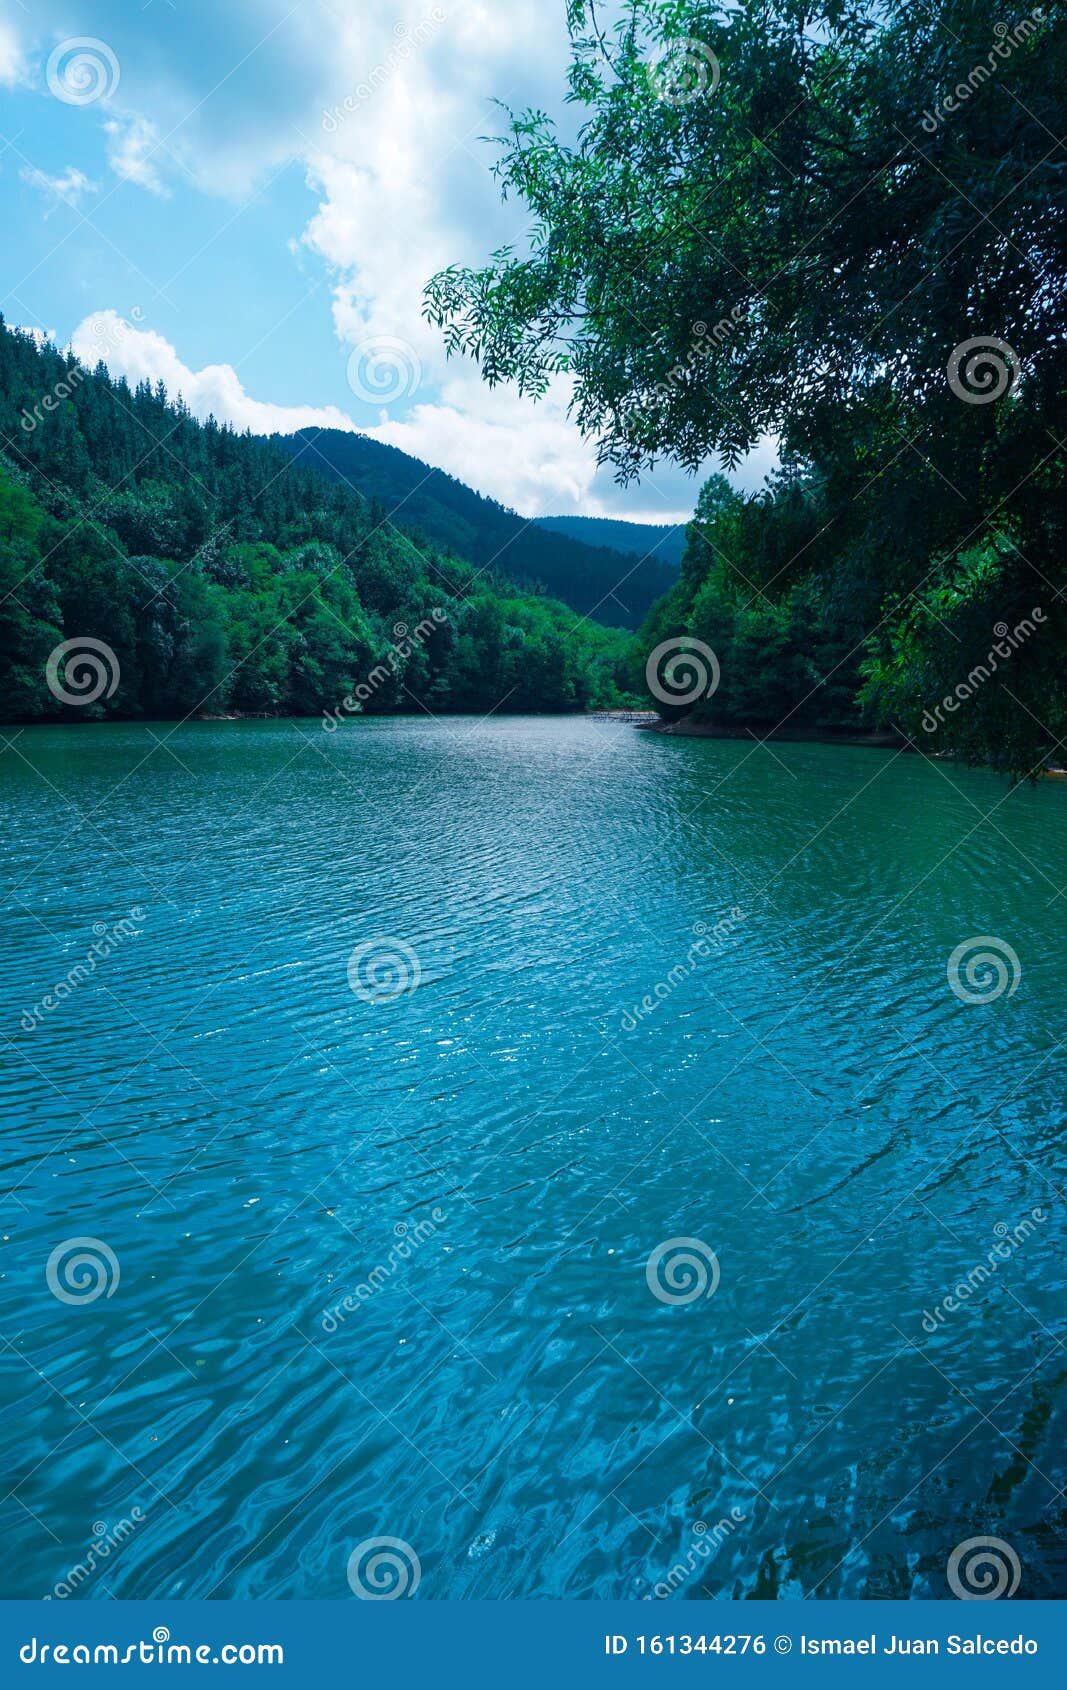 Green Trees In The Lake In The Nature In The Mountain Stock Photo - Image  of landscape, place: 161344276